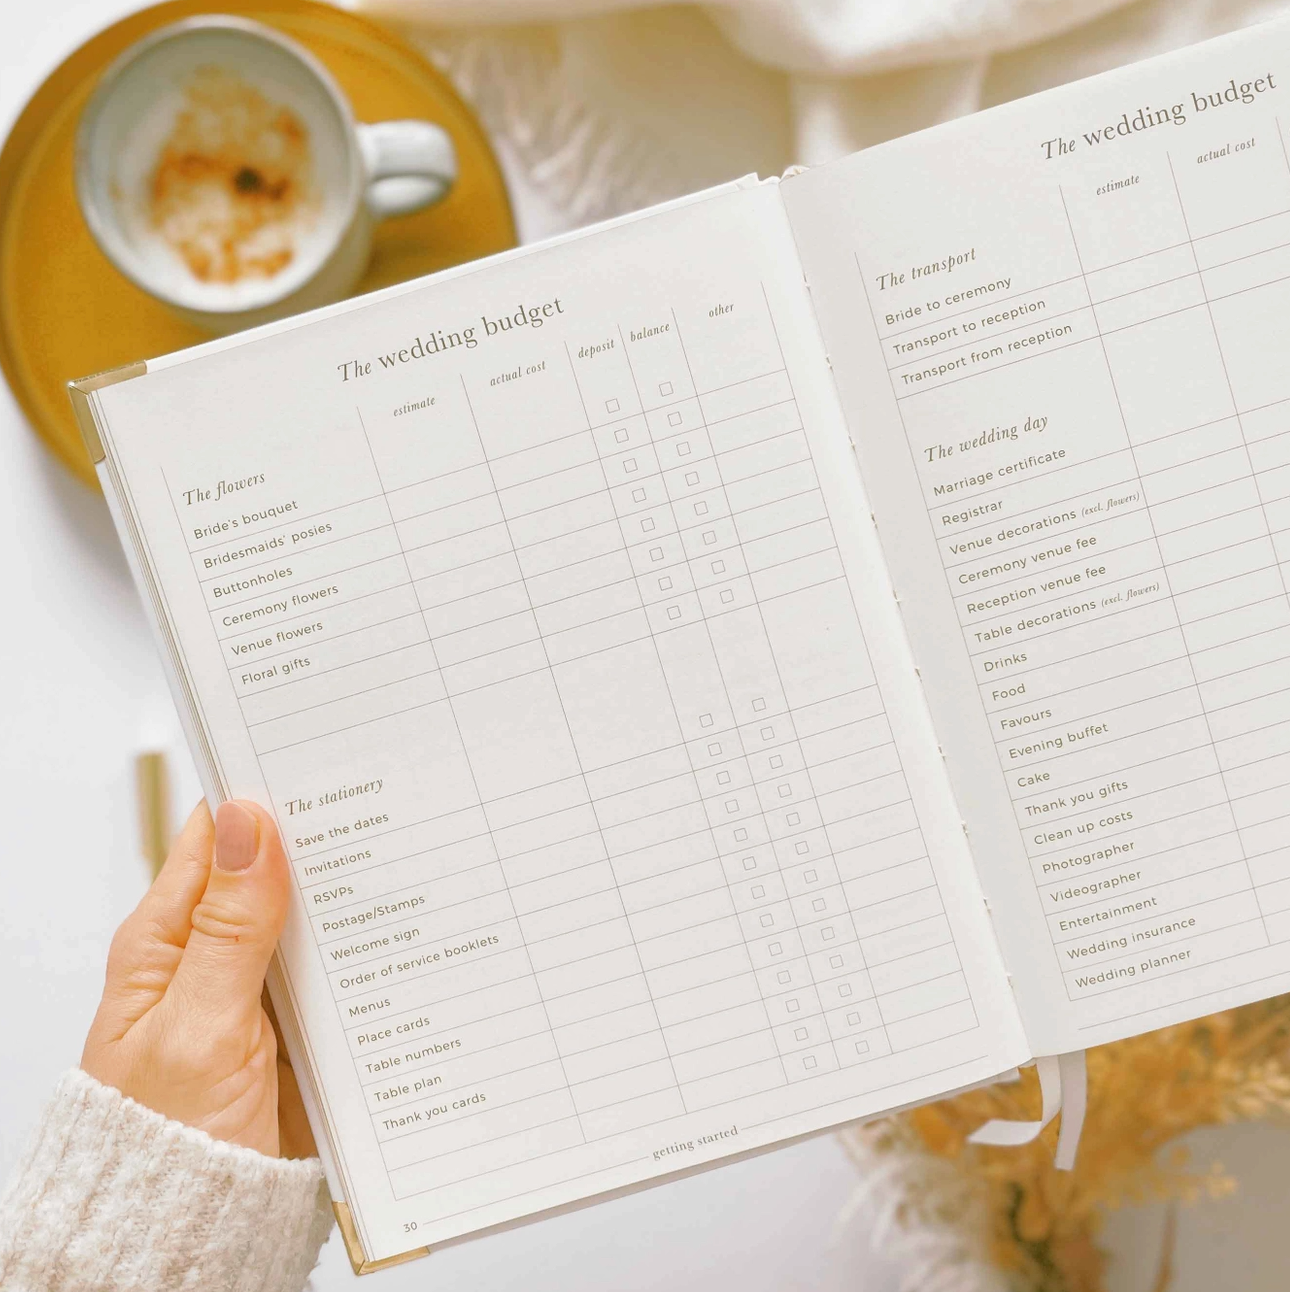 Gleaming gold touches adorn this essential wedding planning guide.